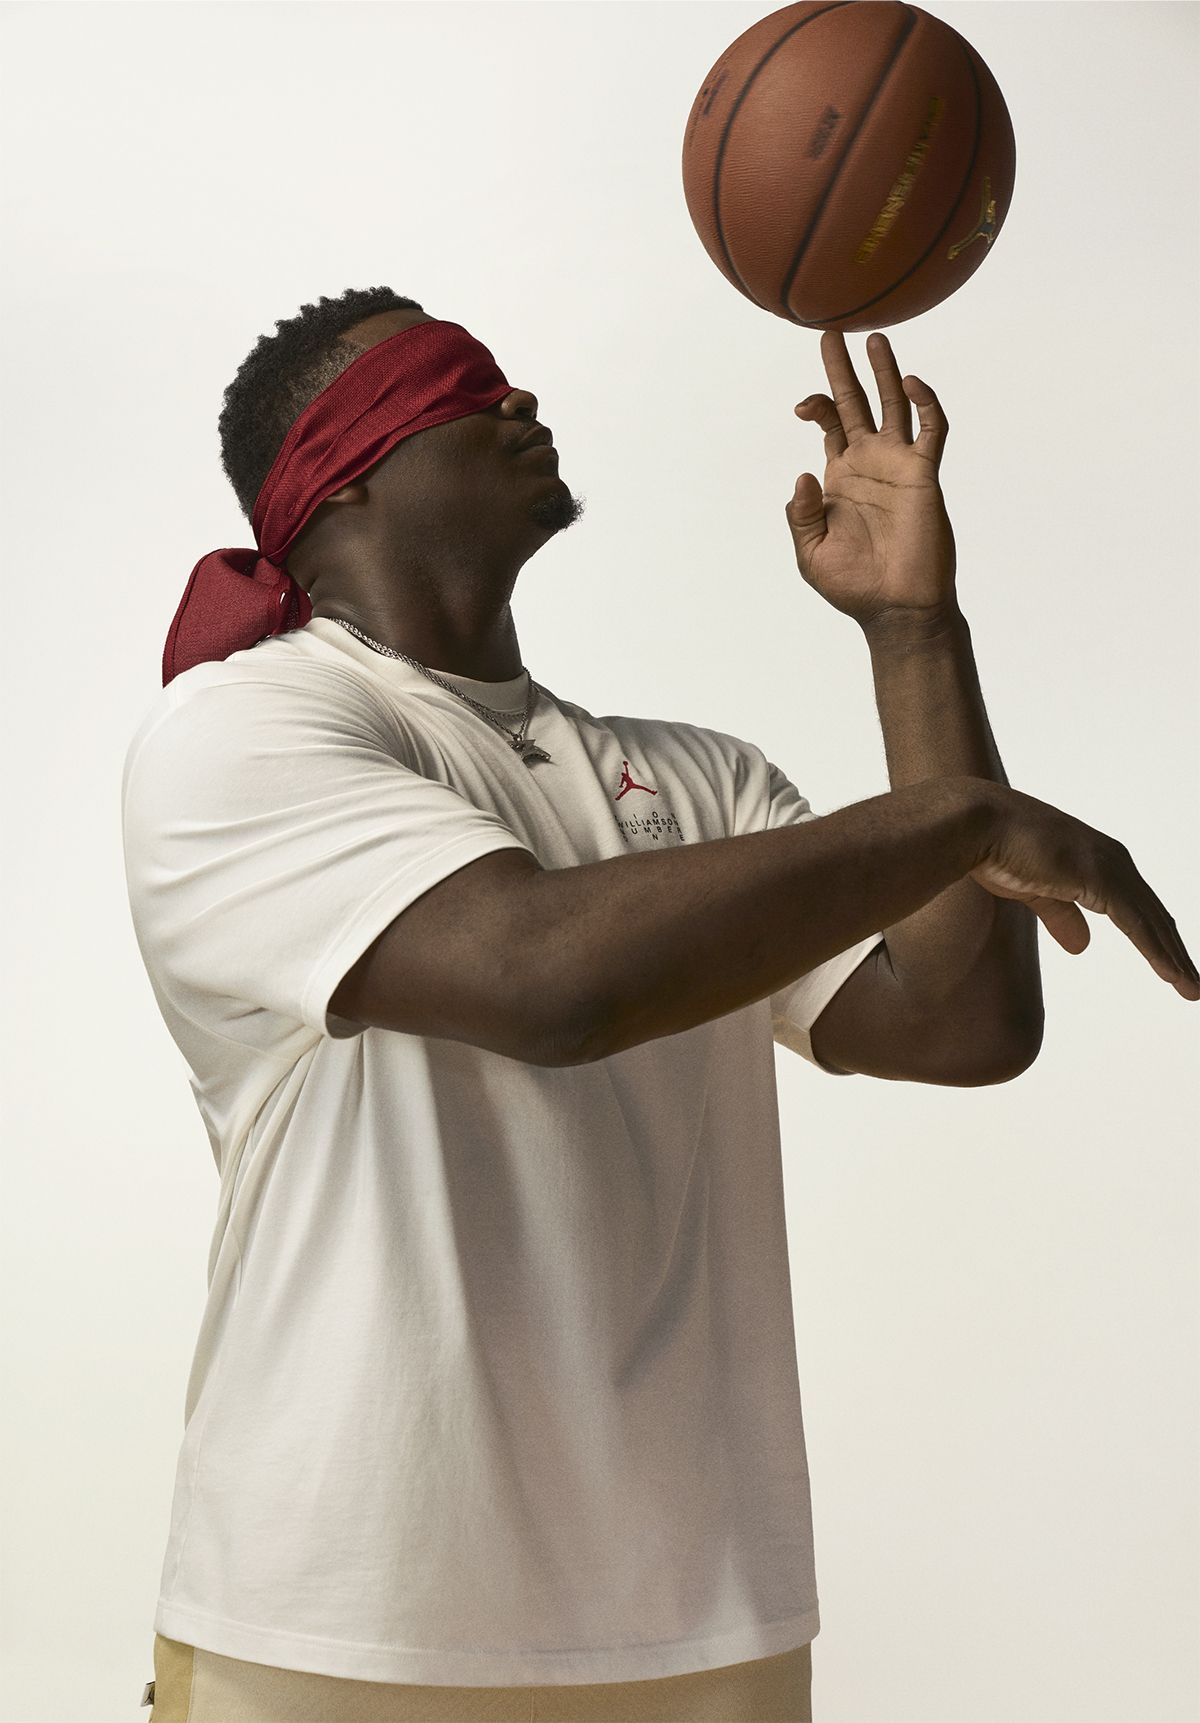 Zion spinning basketball on his finger while blindfolded